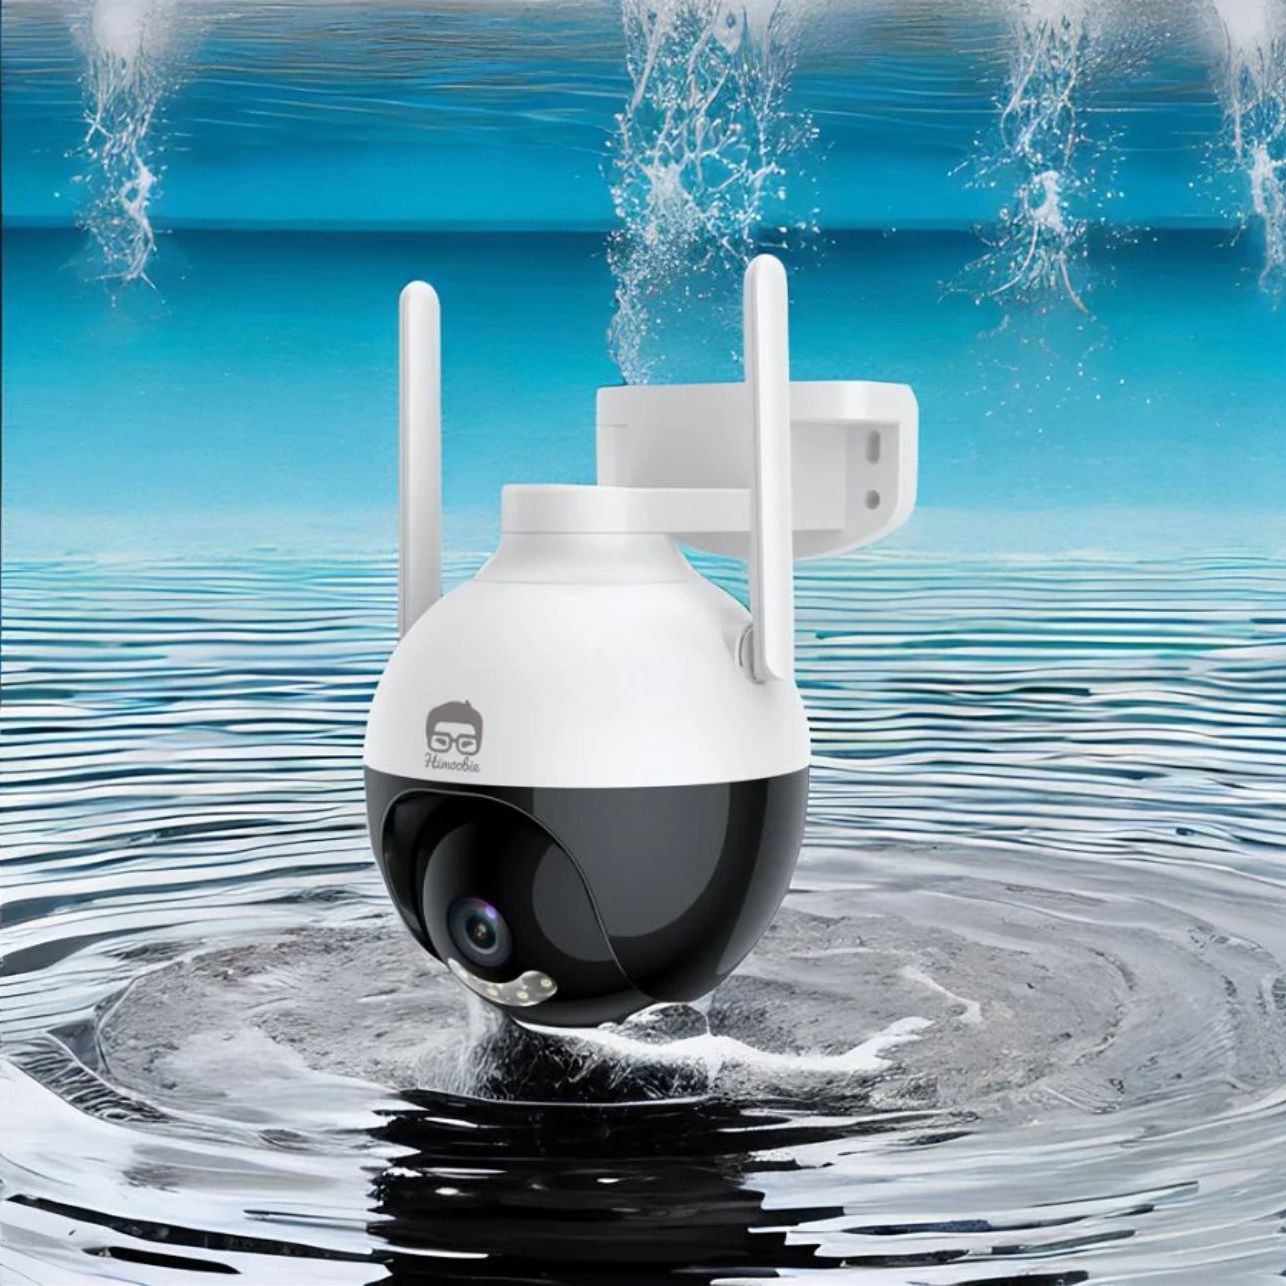 Waterproof Camera, Motion Detection, Night Vision, and Night Color WiFi IP Camera  for Home Office